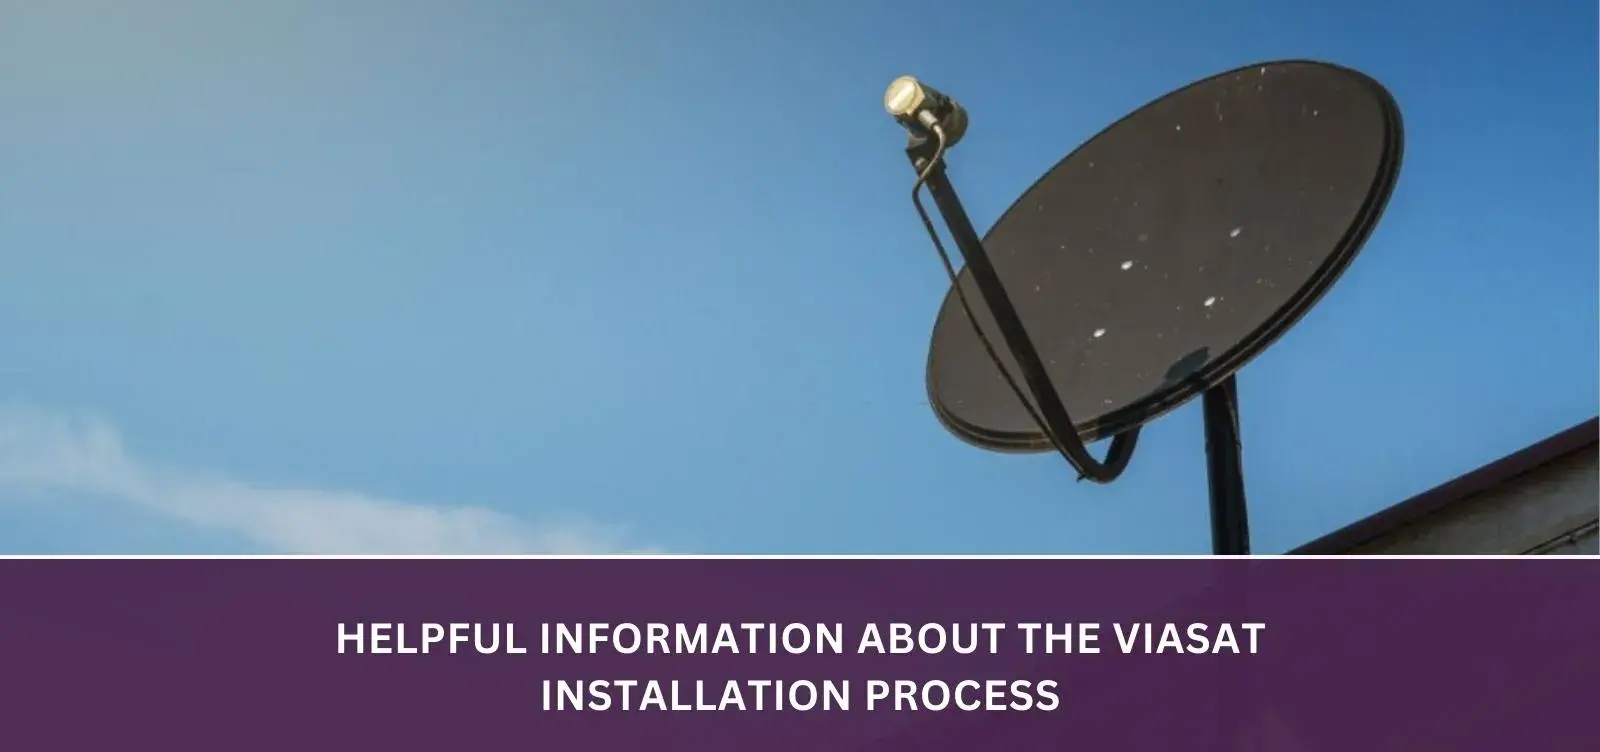 Helpful information about the Viasat installation process